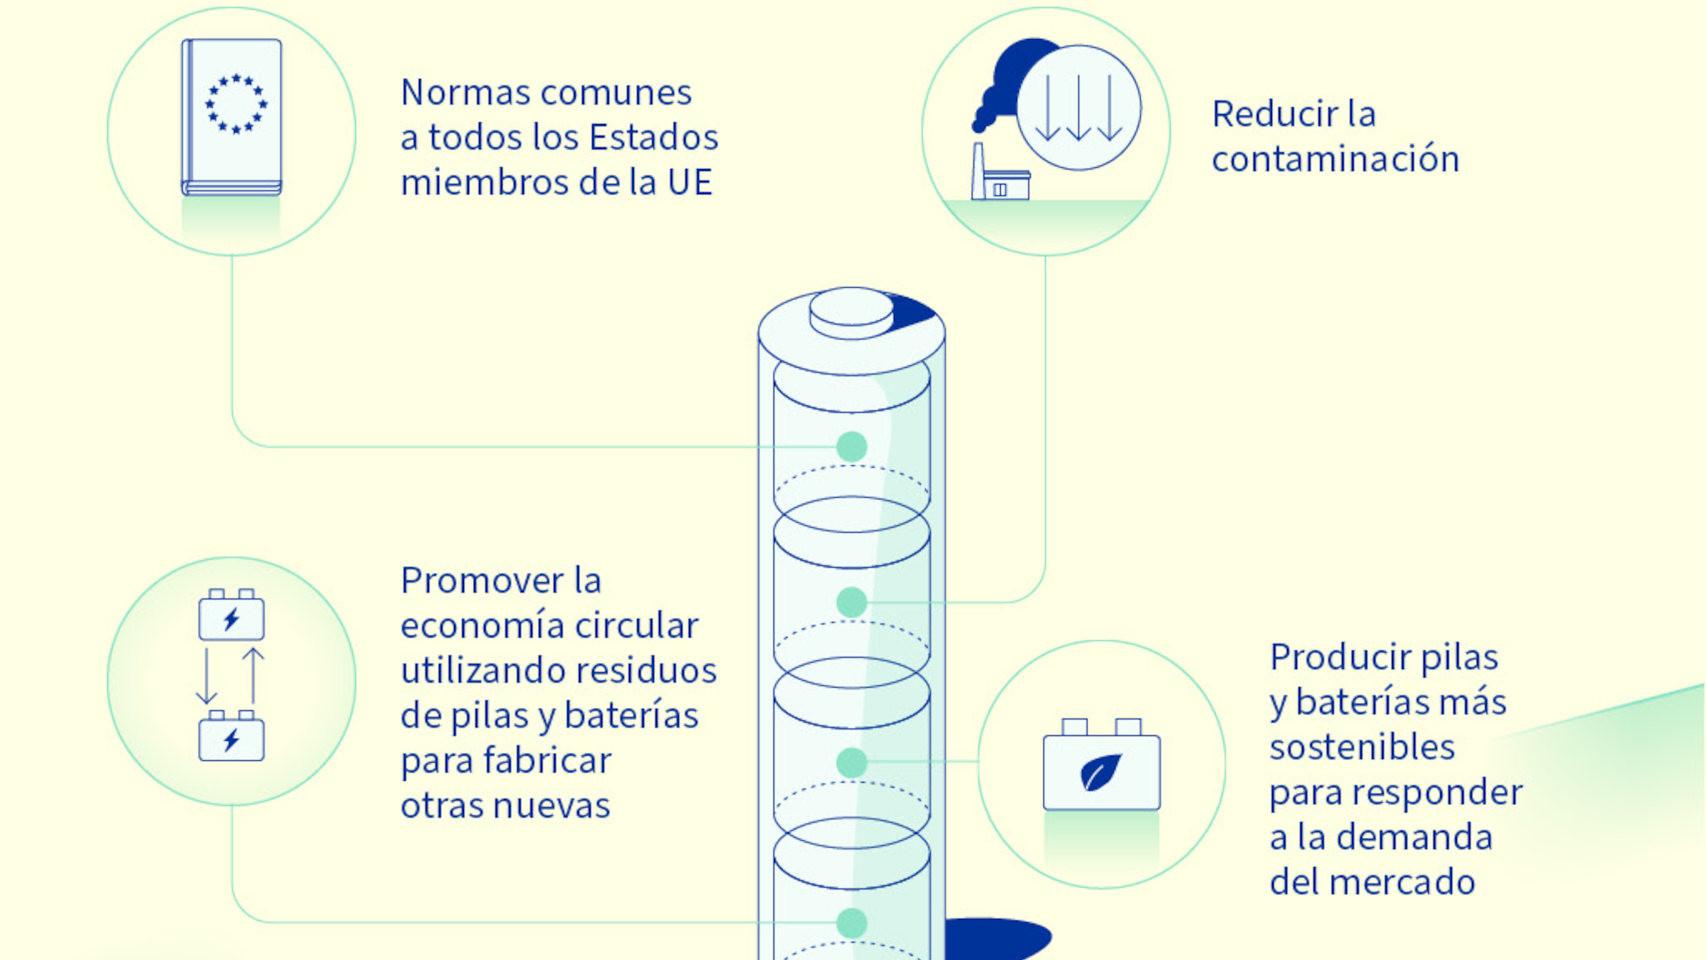 Objectives of the new EU Cells and Batteries Regulation